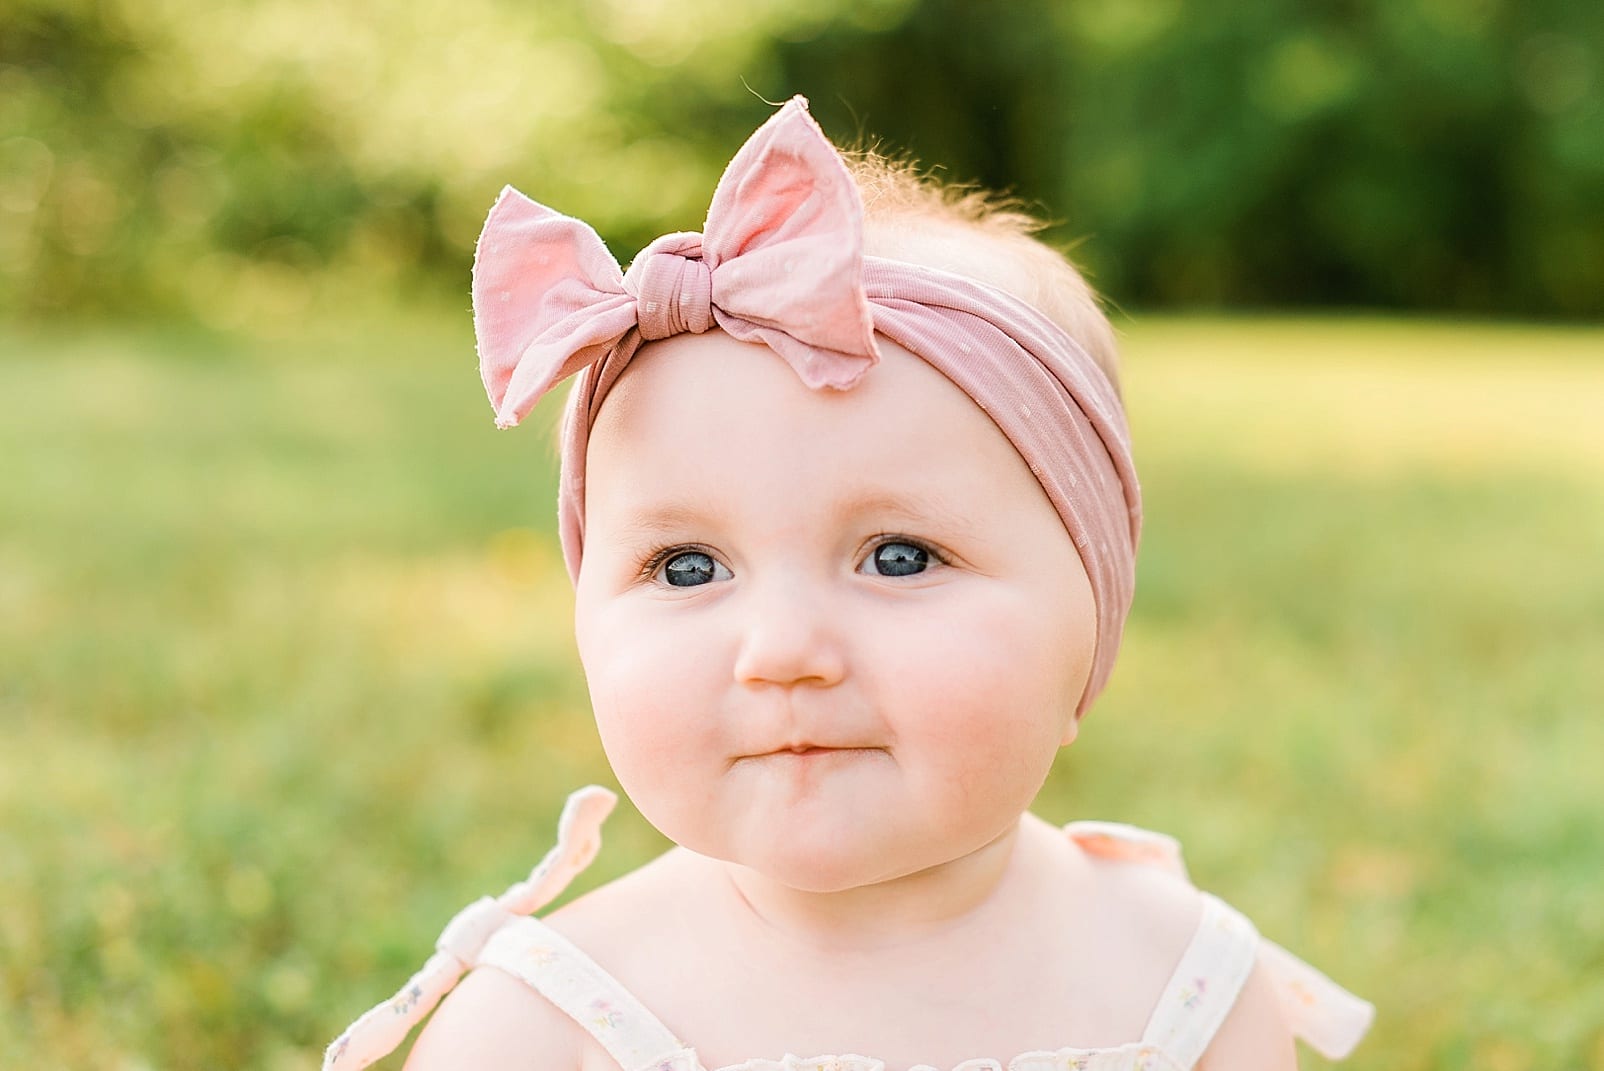 Raleigh baby in a blush pink headband photo